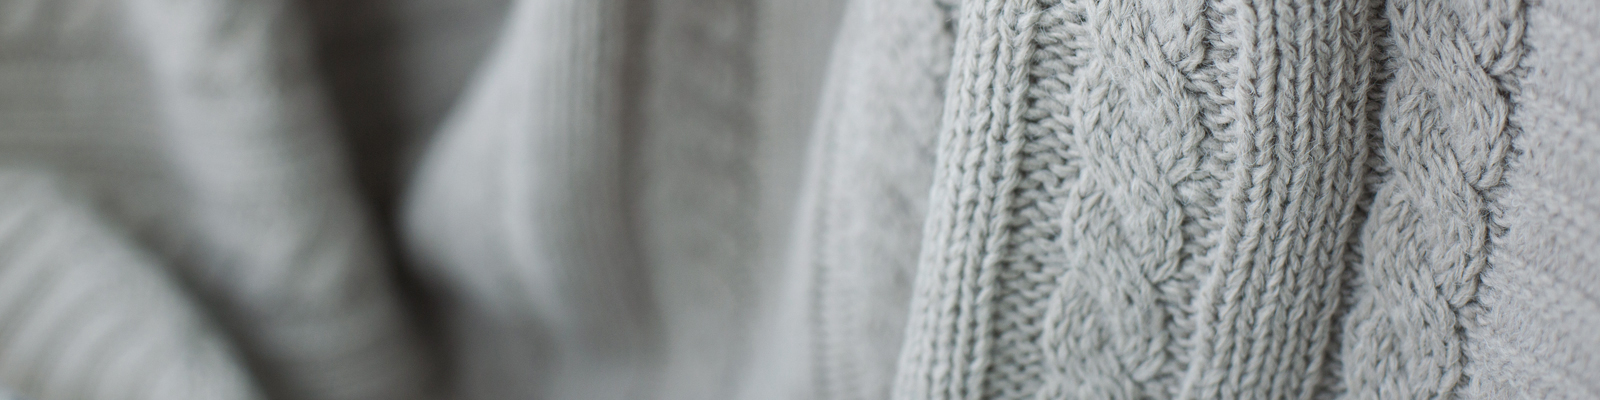 Close up photo of a grey knitted sweater at Amica senior living residence.